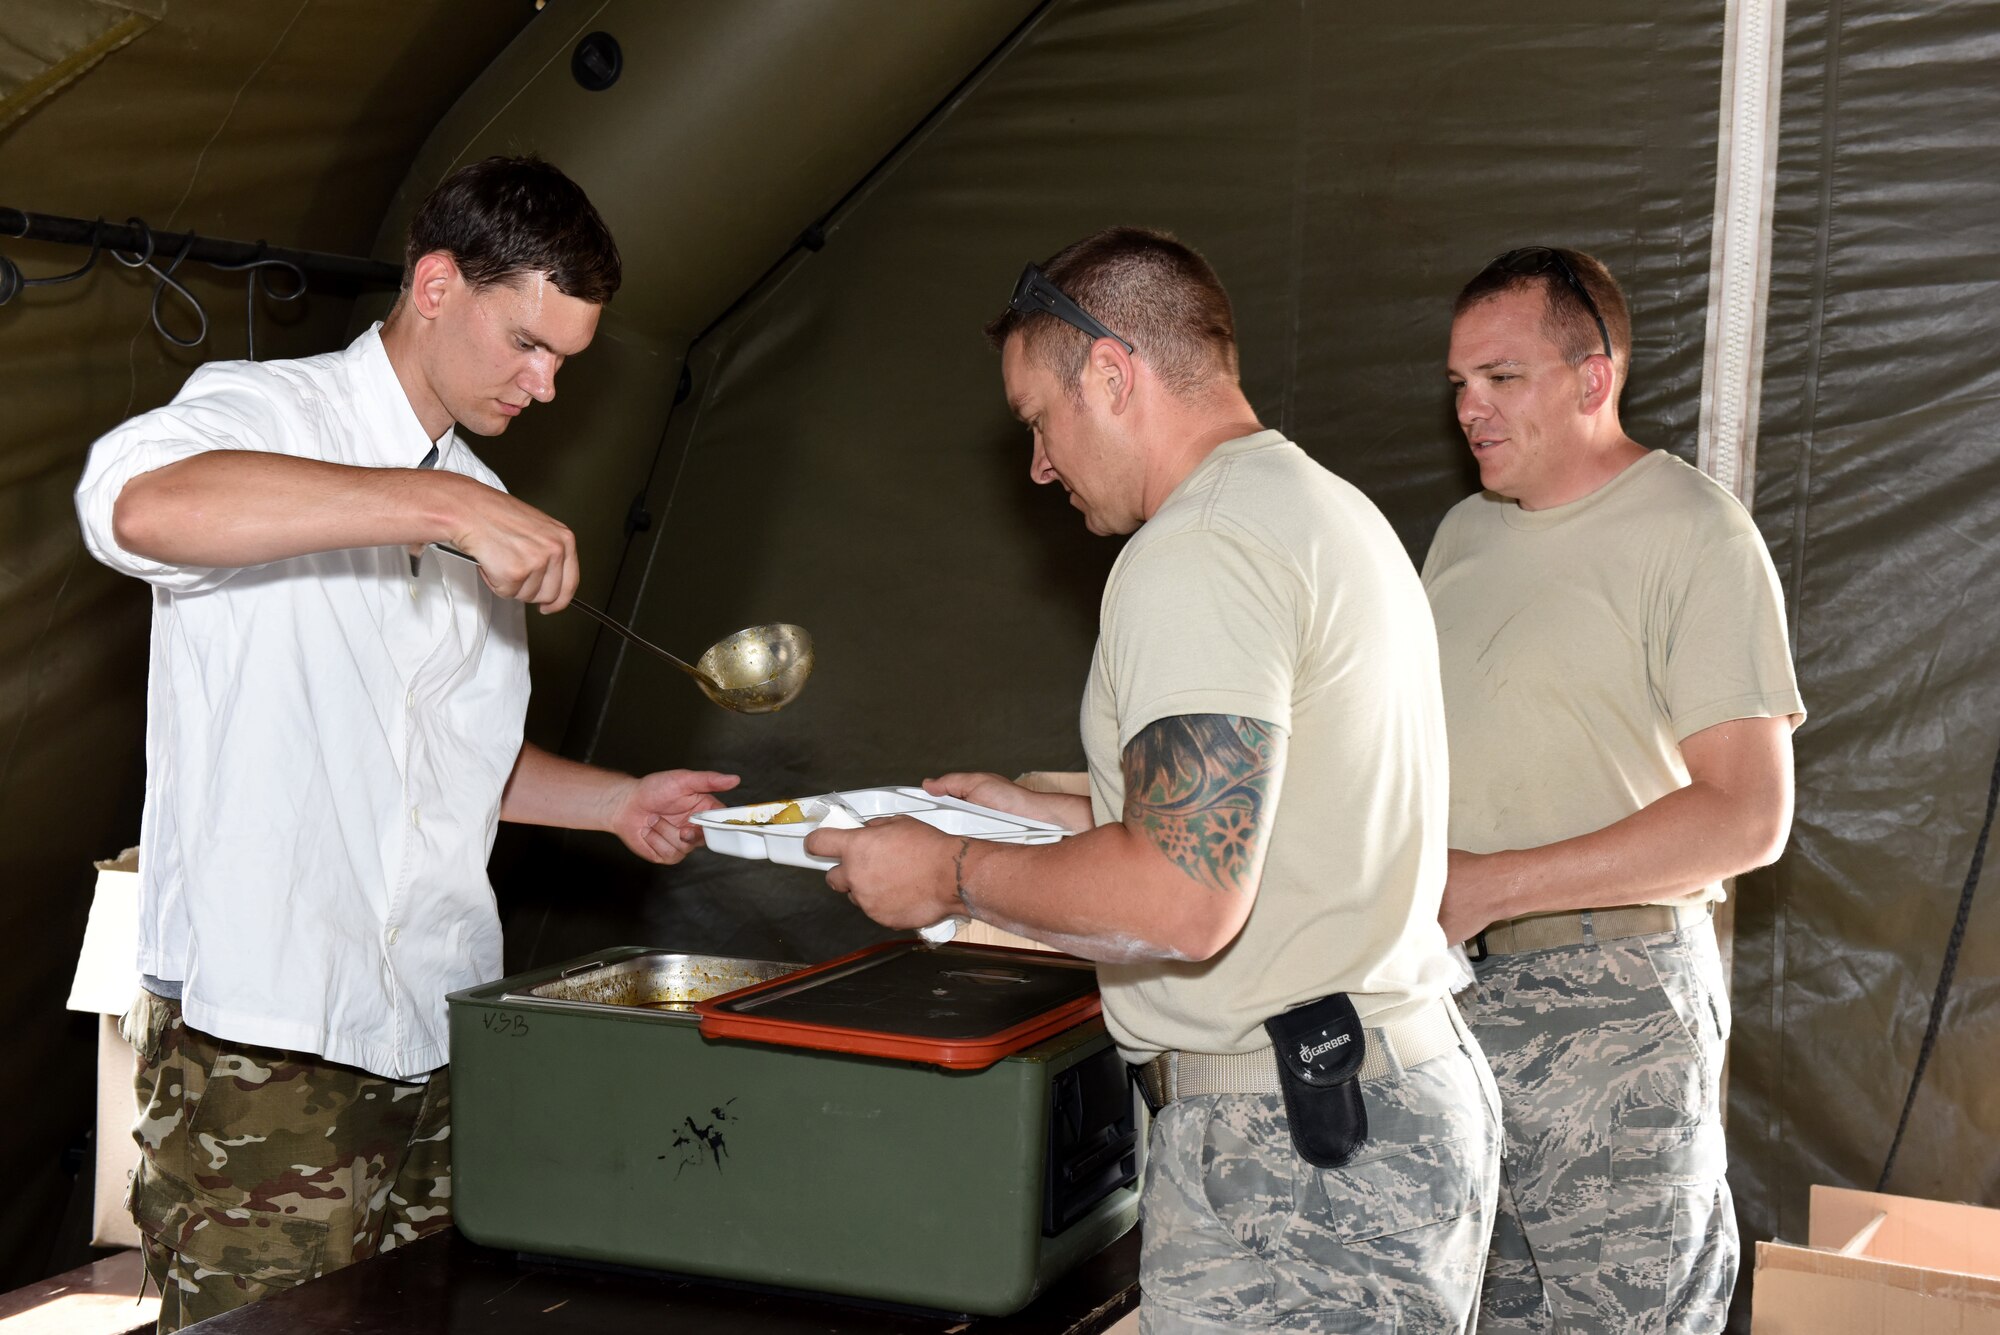 U.S. Air Force Staff Sgt. Dane Wetterer and Senior Master Sgt. Harry Smith, 233d Space Communications Squadron, Colorado Air National Guard (COANG) are served lunchby a member of the Slovenian Armed Forces (SAF) at Pocek Range, near Postonja, Slovenia, July 24, 2015. The COANG is on a deployed for training mission to upgrade the current Slovenian range facility with more enhanced capabilities that will be able to conduct multinational training for on ground and air-to-ground tactics in the European theater. (U.S. Air National Guard photo by Senior Airman Michelle Y. Alvarez-Rea/Released)